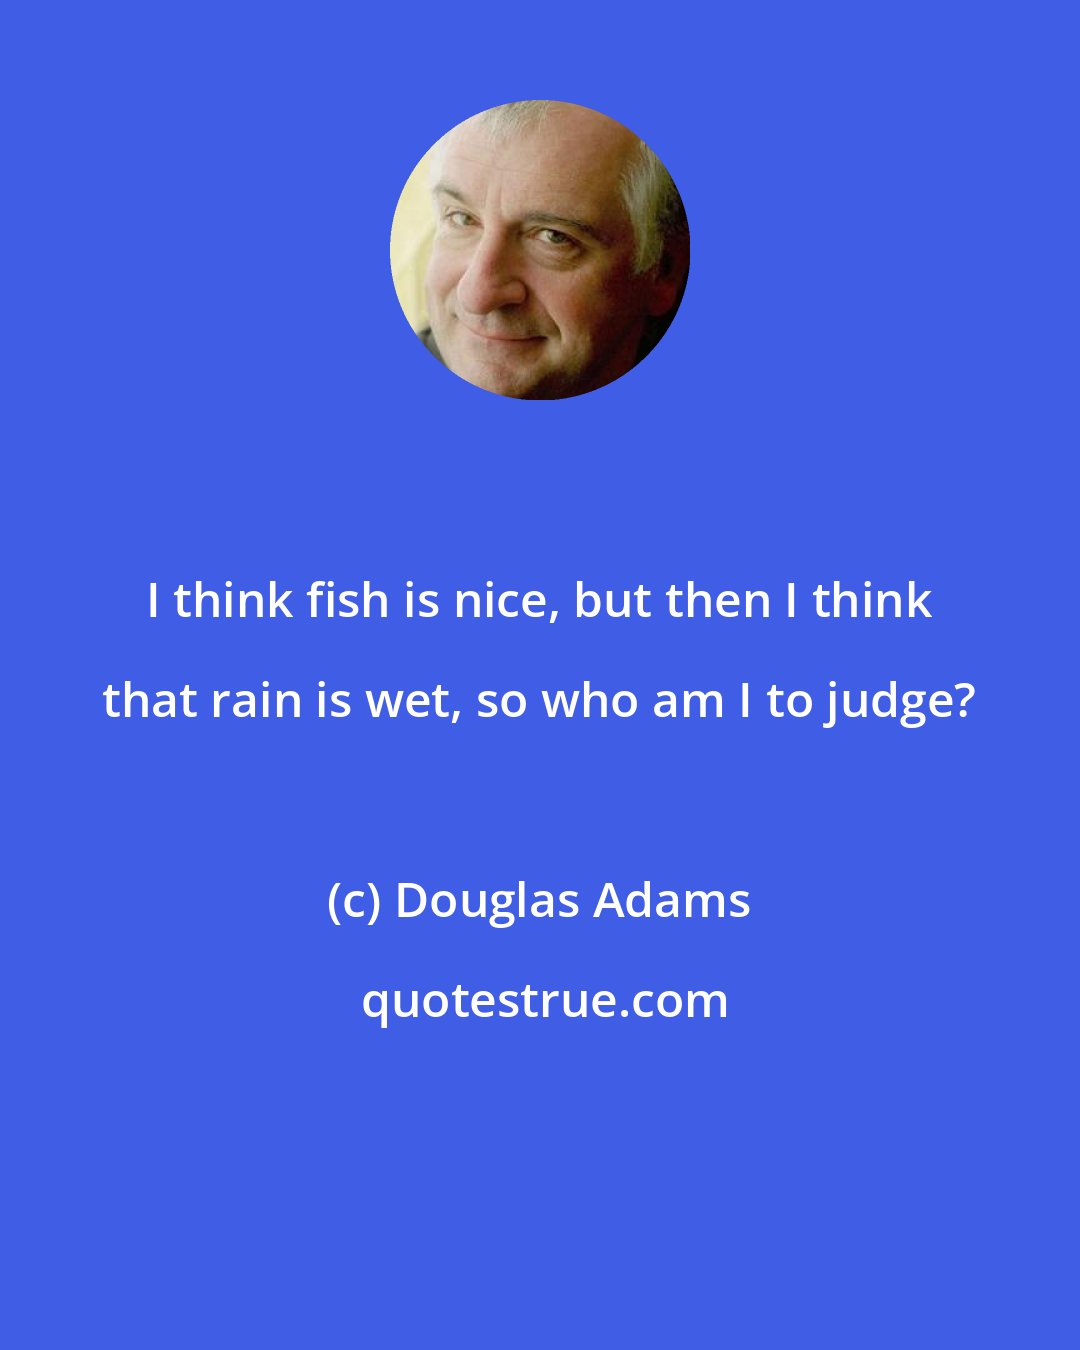 Douglas Adams: I think fish is nice, but then I think that rain is wet, so who am I to judge?